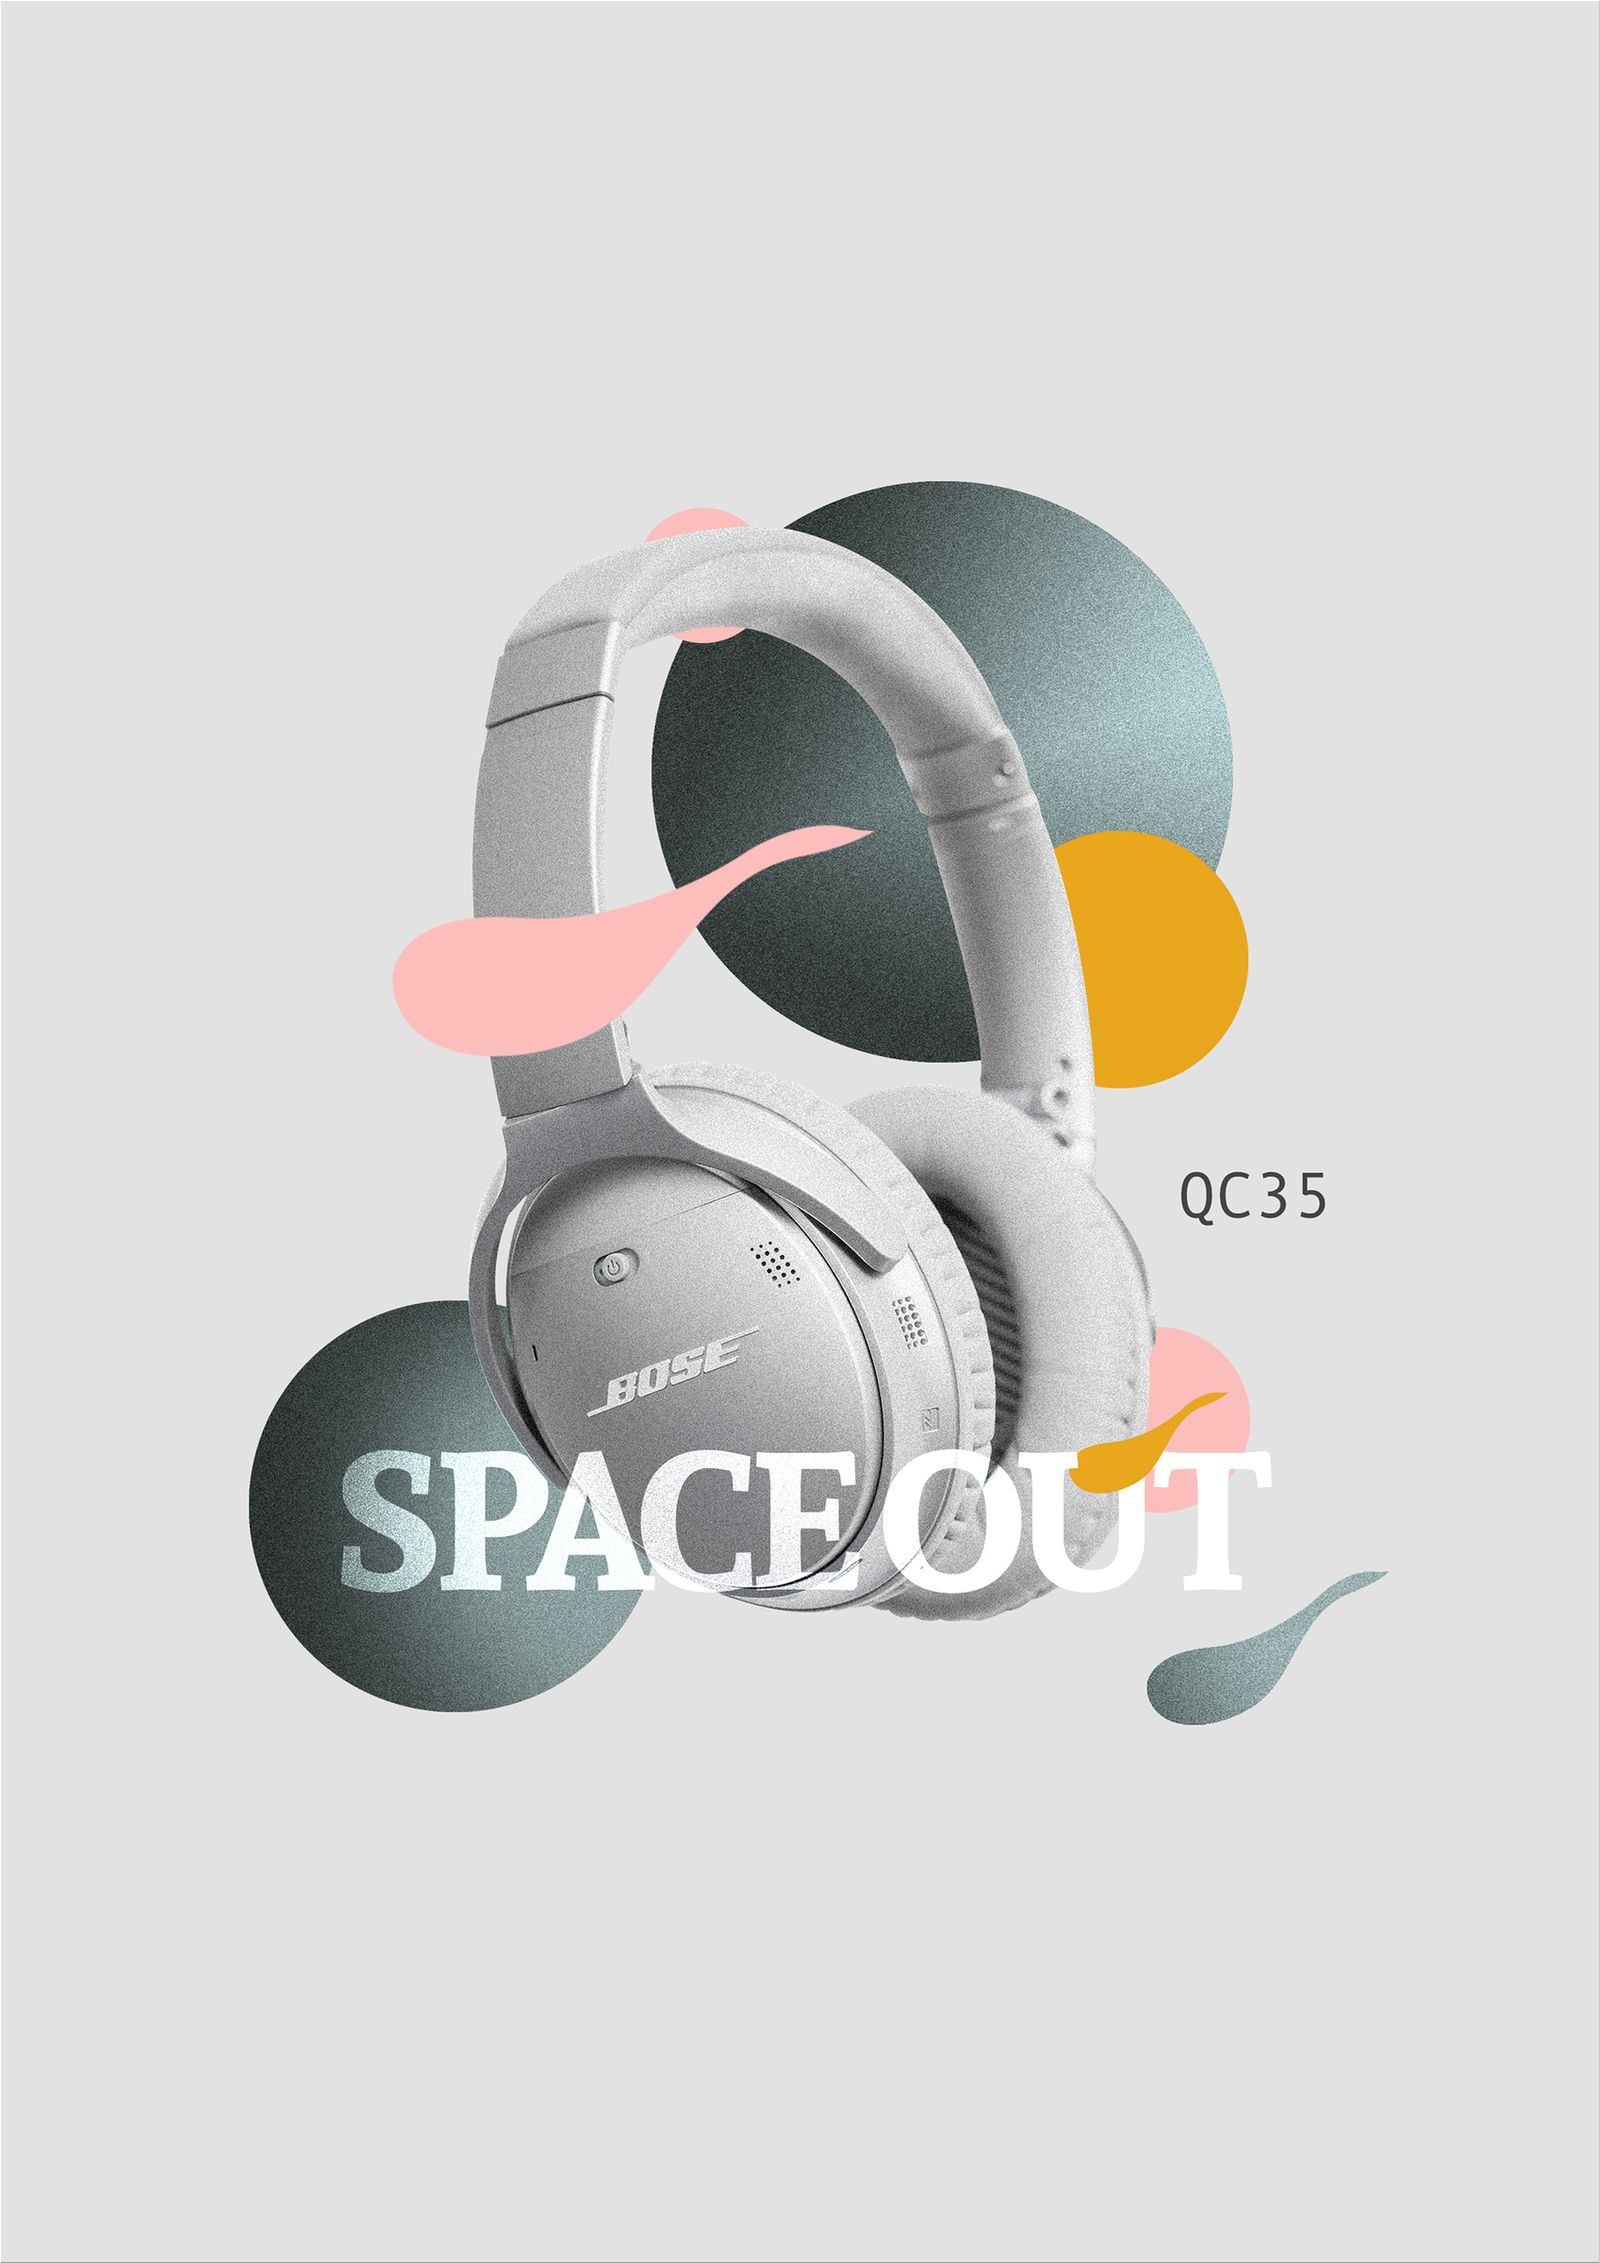 Bose "Space Out"|adRuby.com